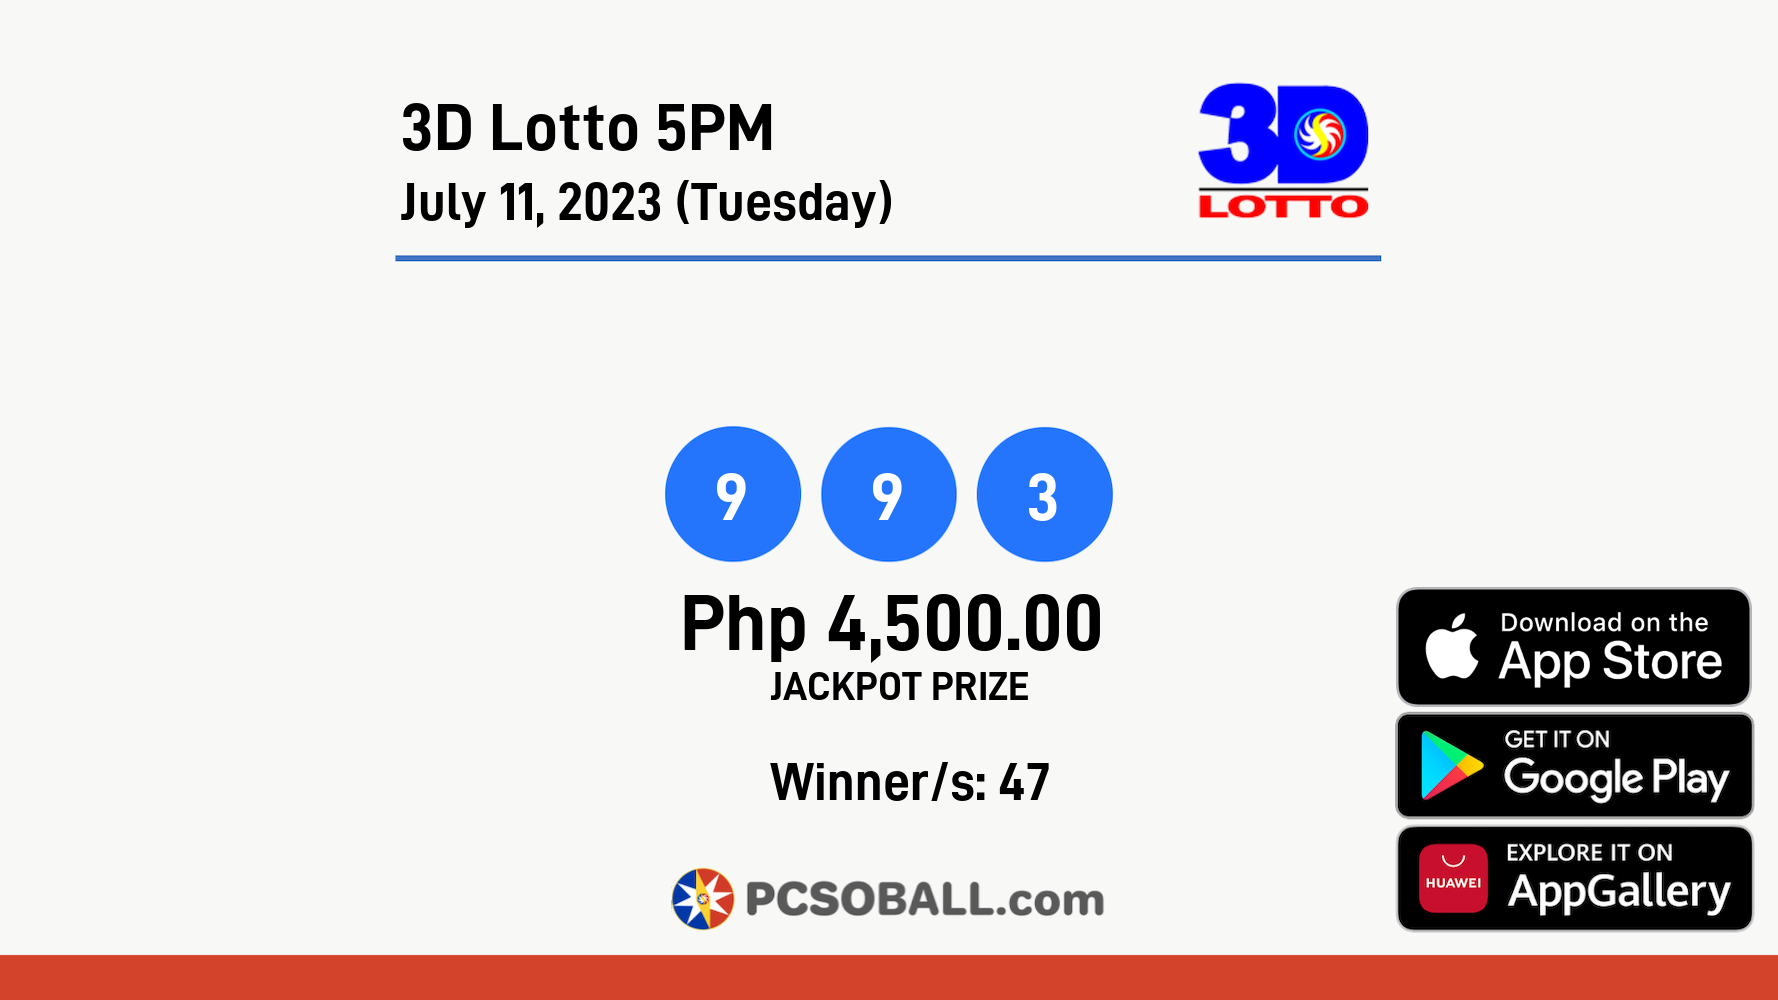 3D Lotto 5PM July 11, 2023 (Tuesday) Result